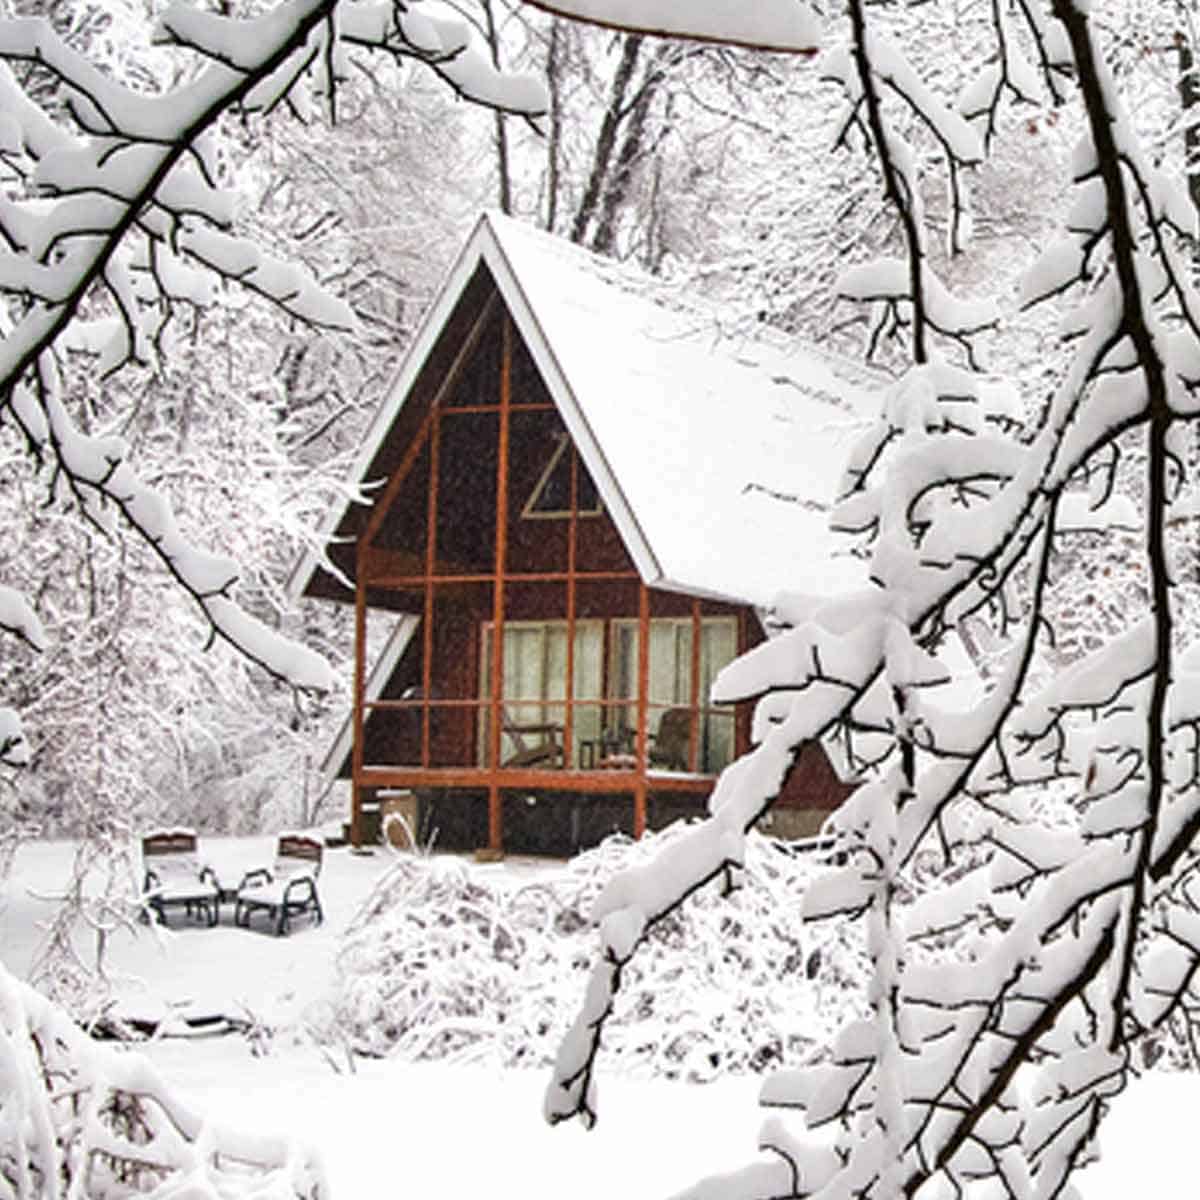 An A-frame cabin in the middle of snowy woods.